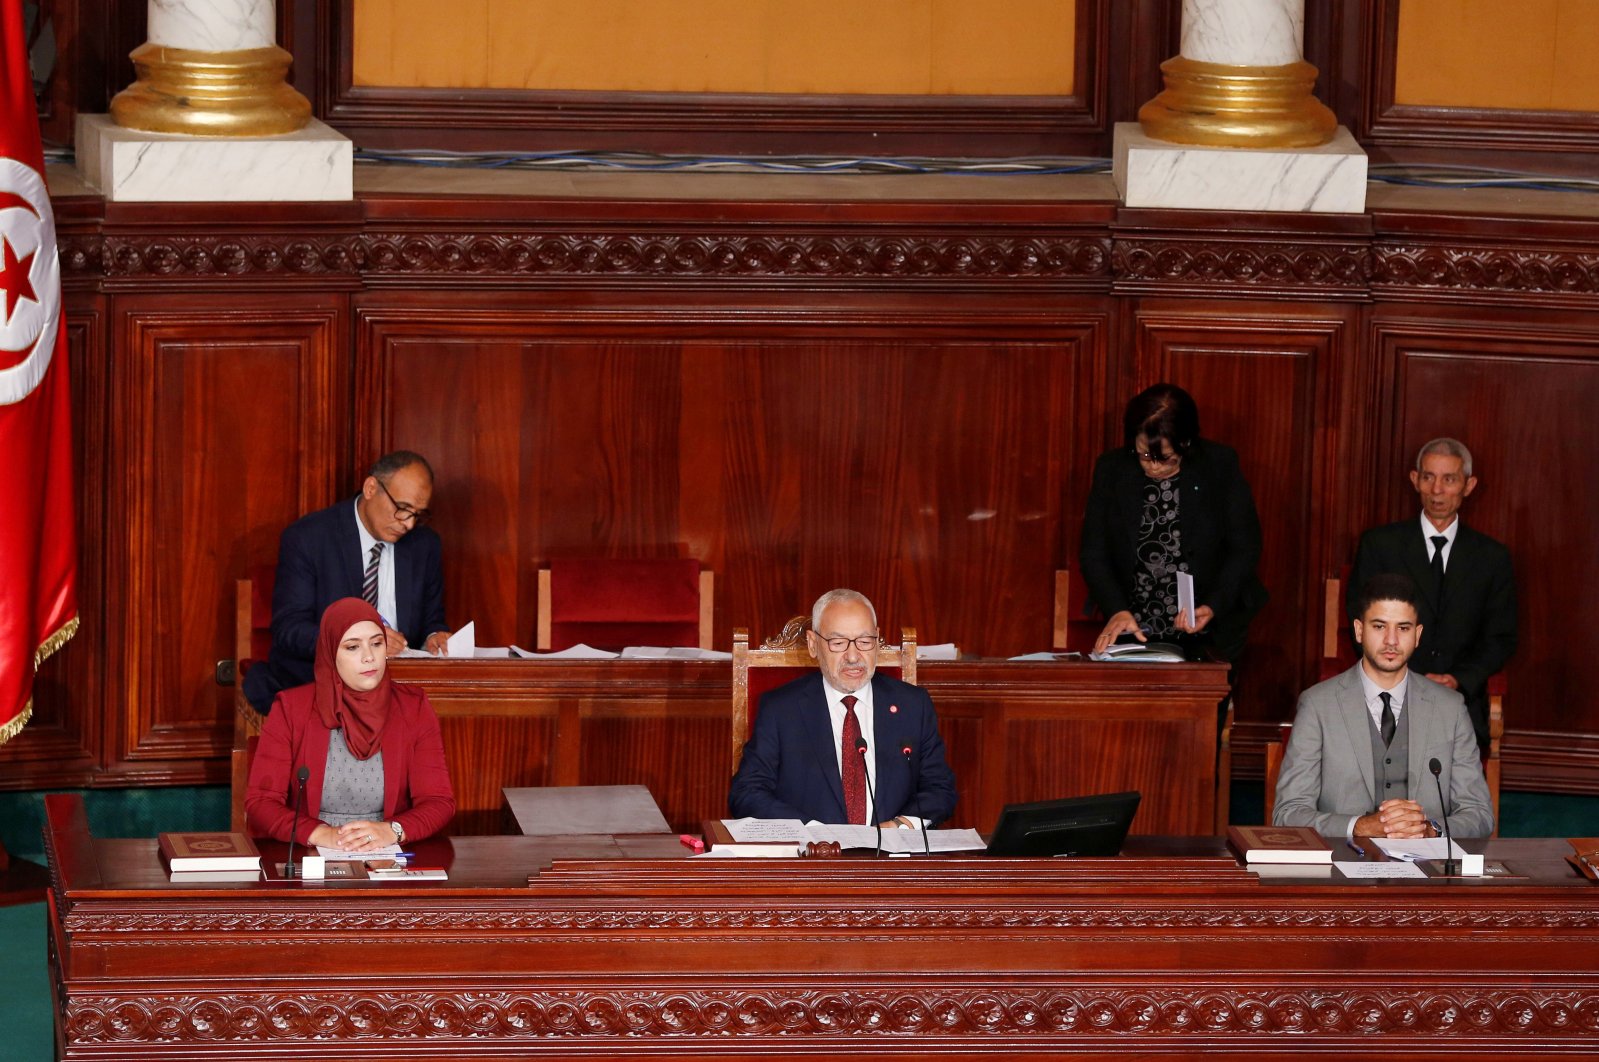 Tunisia's parliament strongly condemns, rejects